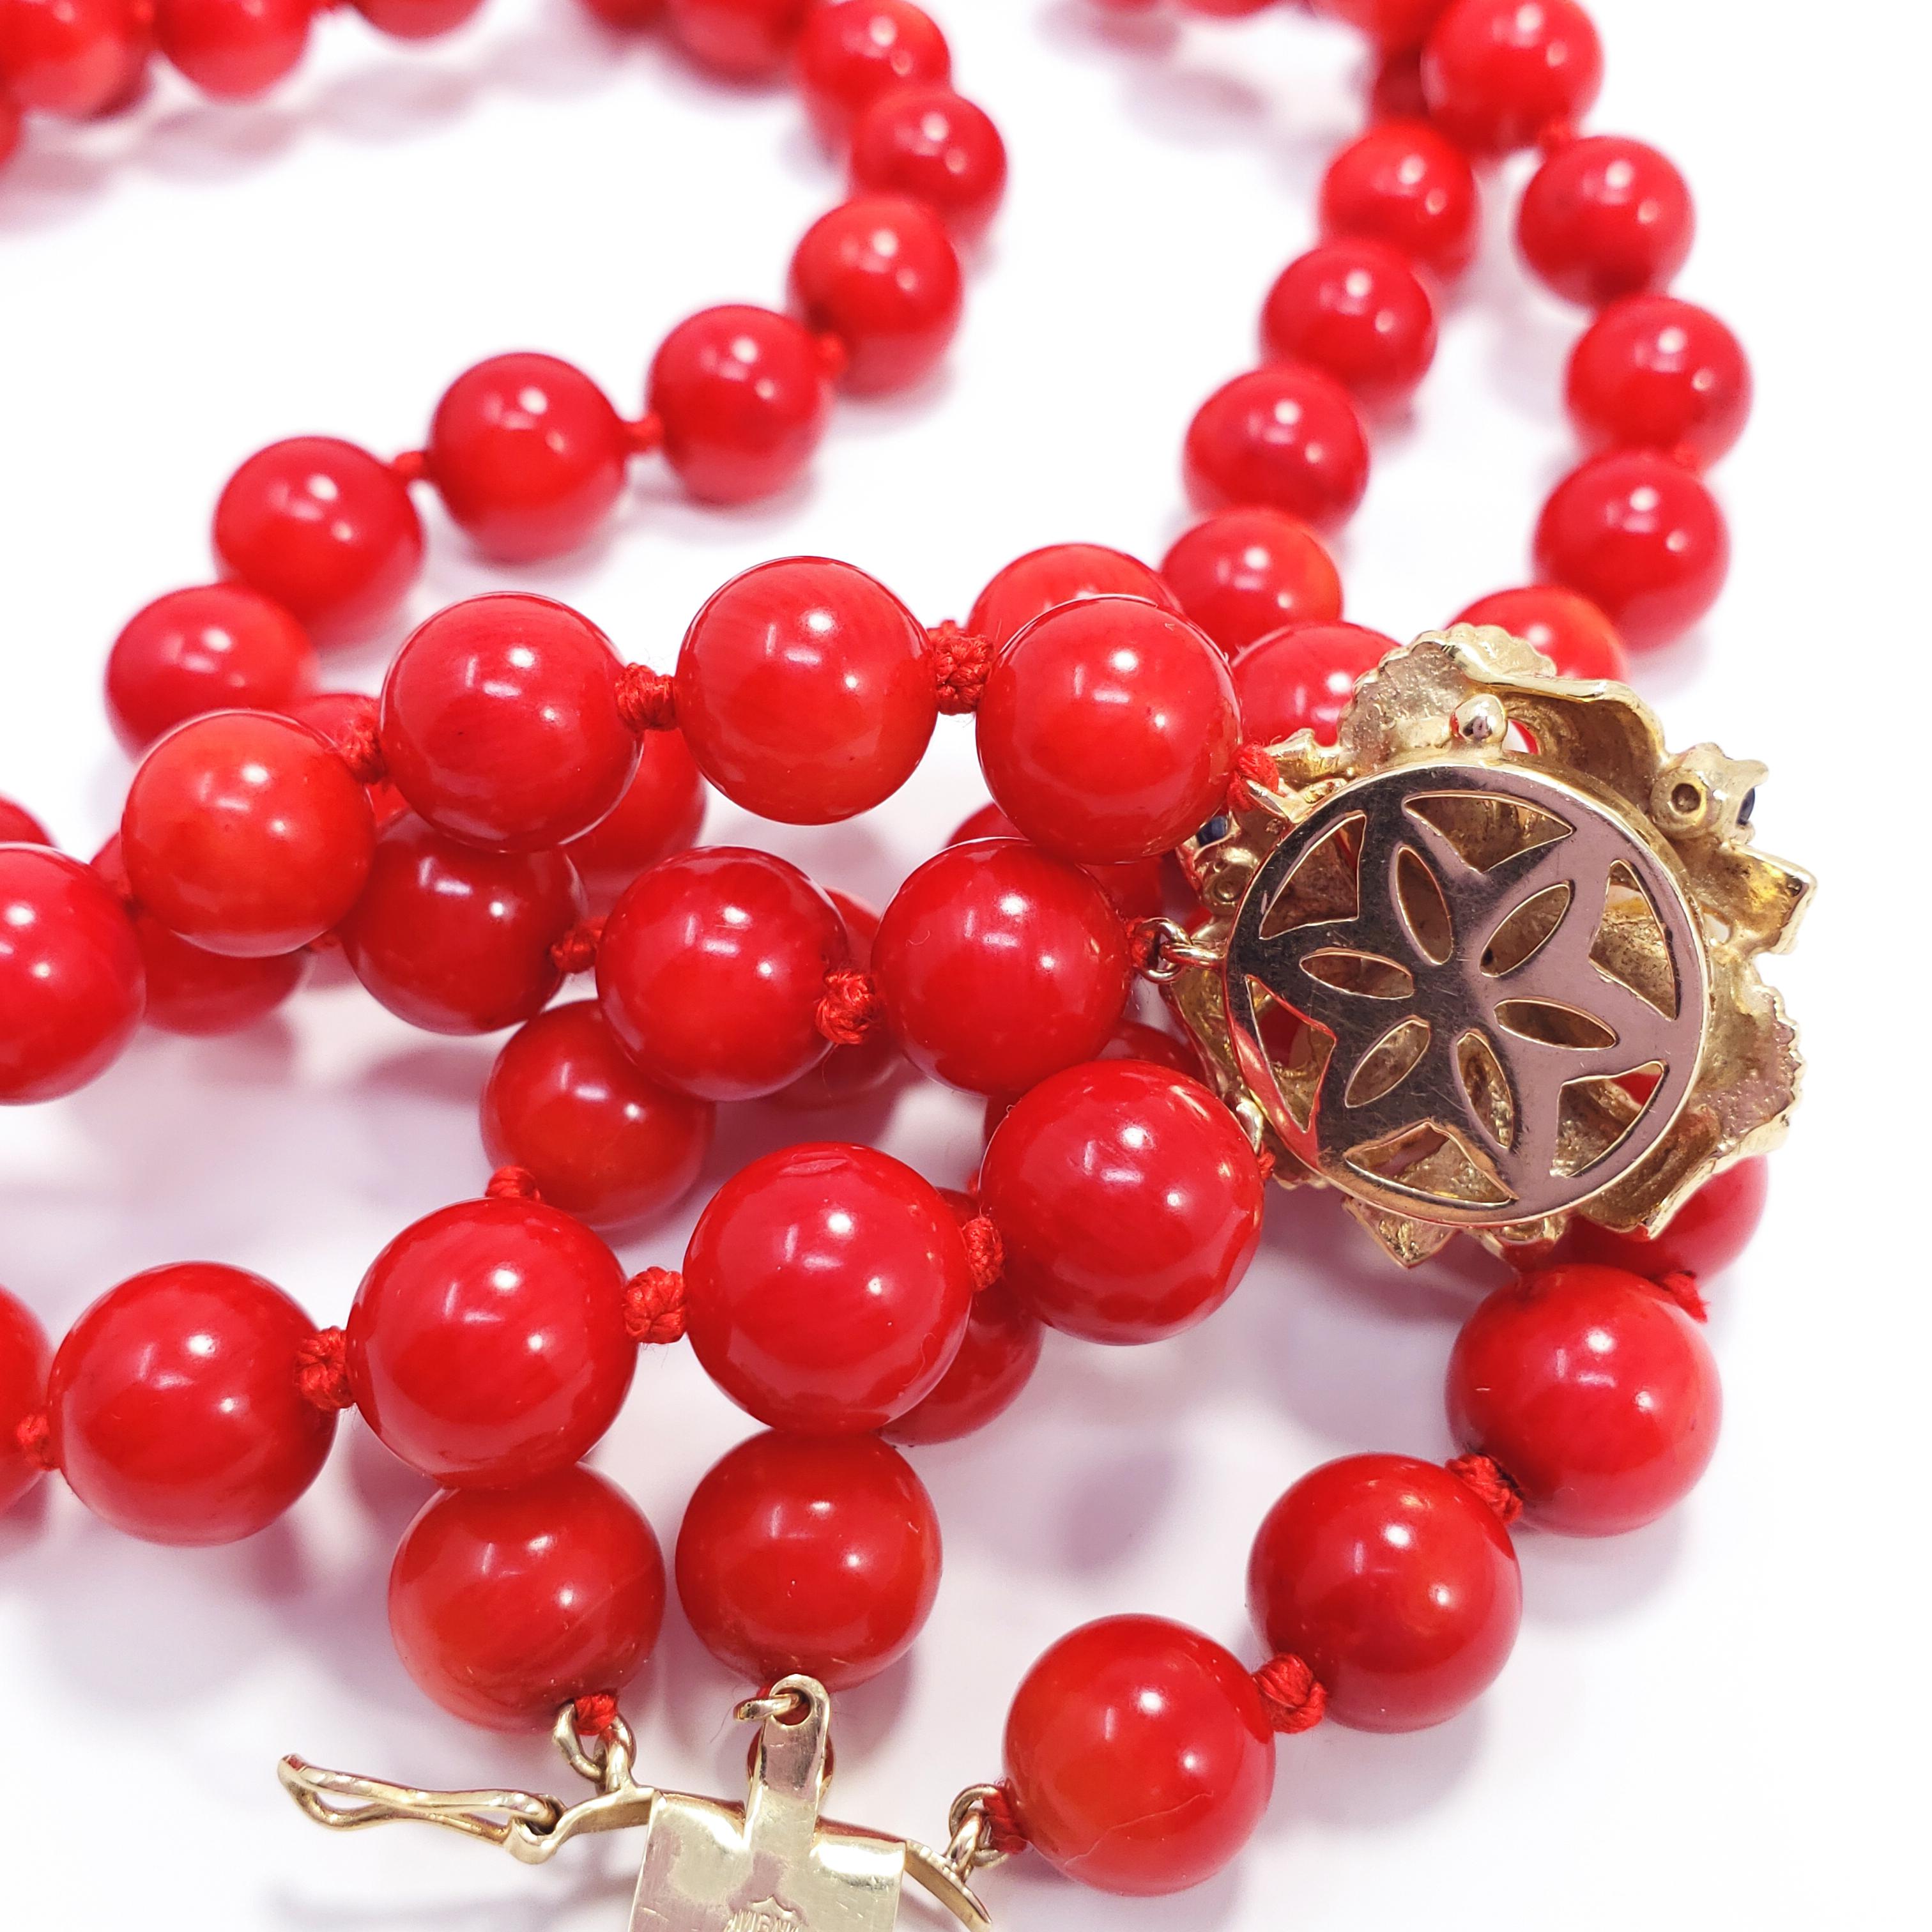 Three-Strand Genuine Red Coral Necklace, 14 Karat Clasp with Pearls, Sapphires 3